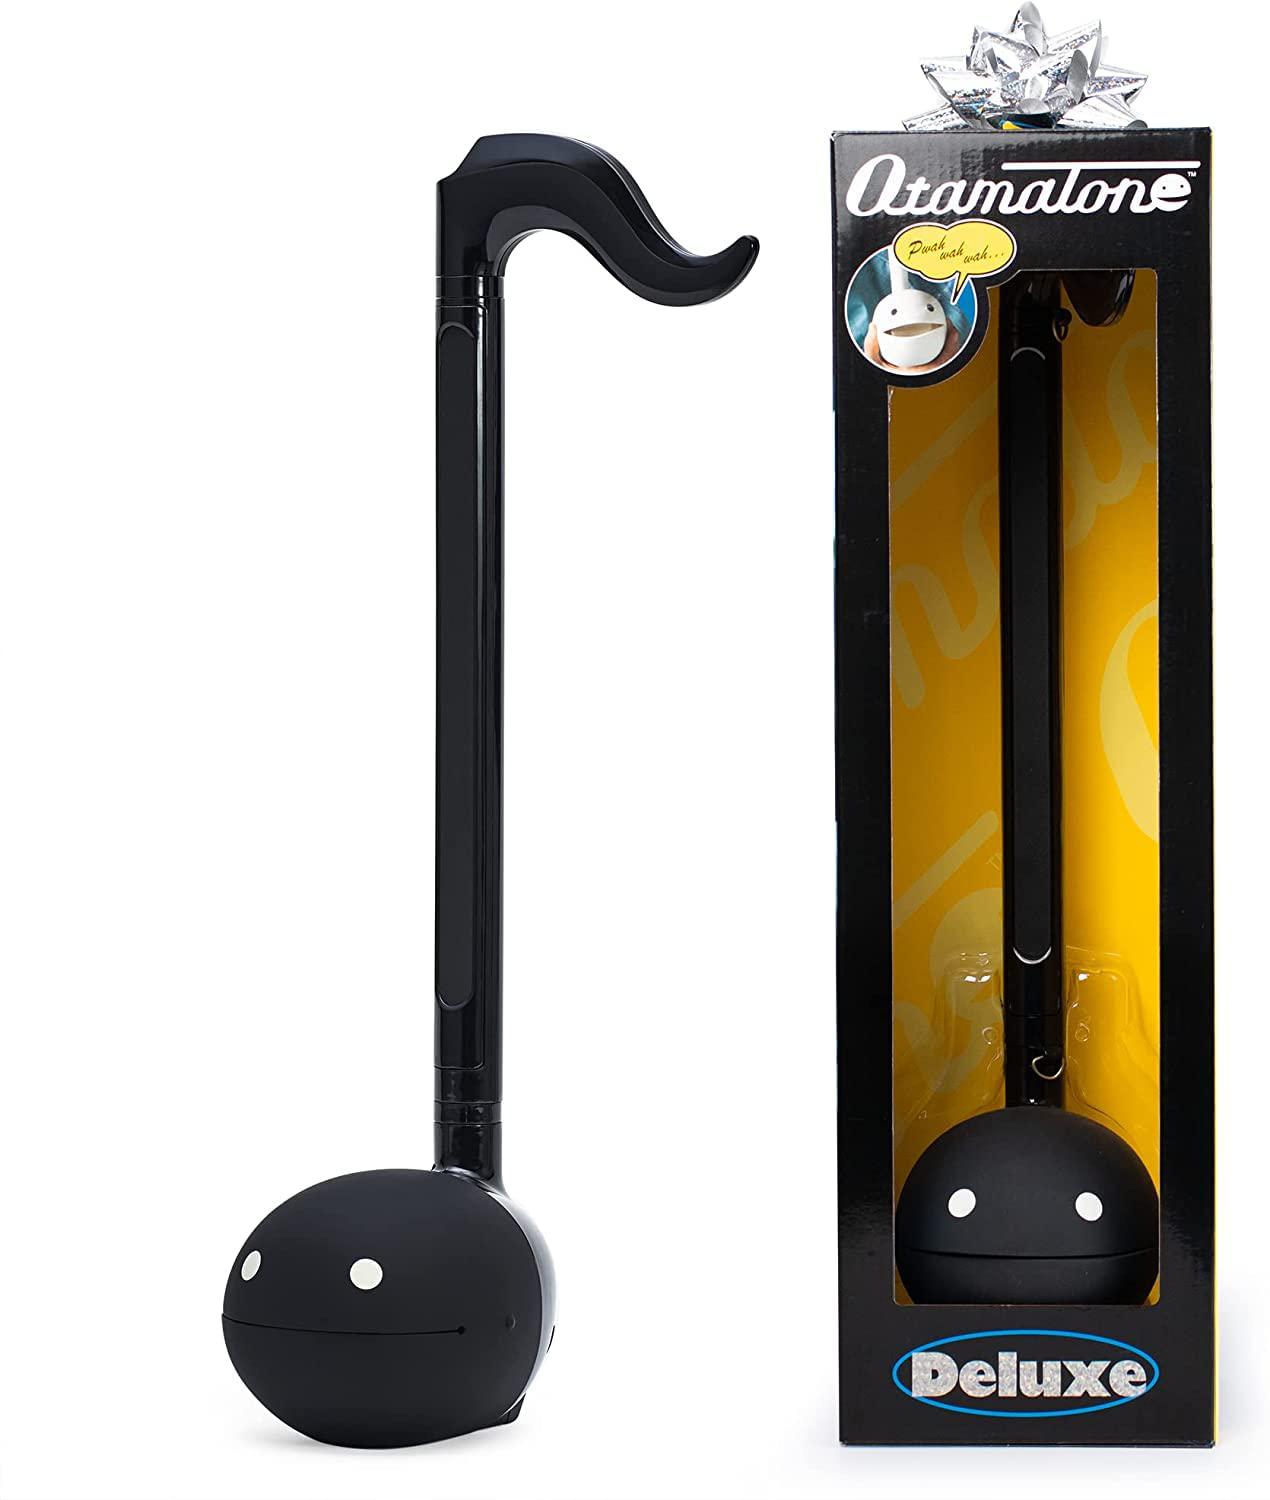 otamatone deluxe electronic musical instrument for adults portable synthesizer digital electric music from japan by cube/mayw